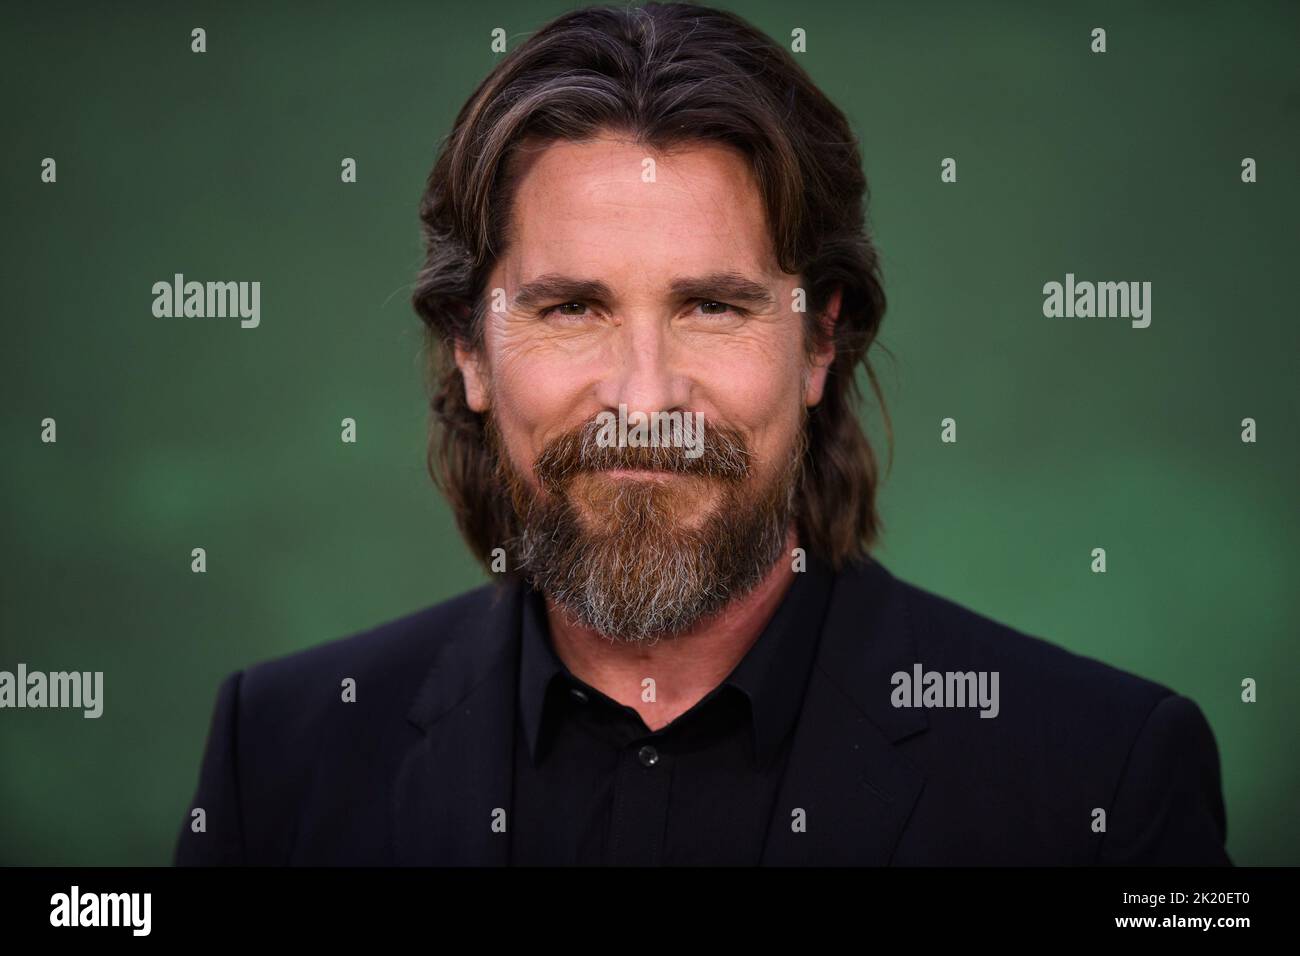 London, UK. 21 September 2022. Christian Bale attending the European premiere of Amsterdam at the Odeon Luxe Leicester Square Cinema, London Picture date: Wednesday September 21, 2022. Photo credit should read: Matt Crossick/Empics/Alamy Live News Stock Photo